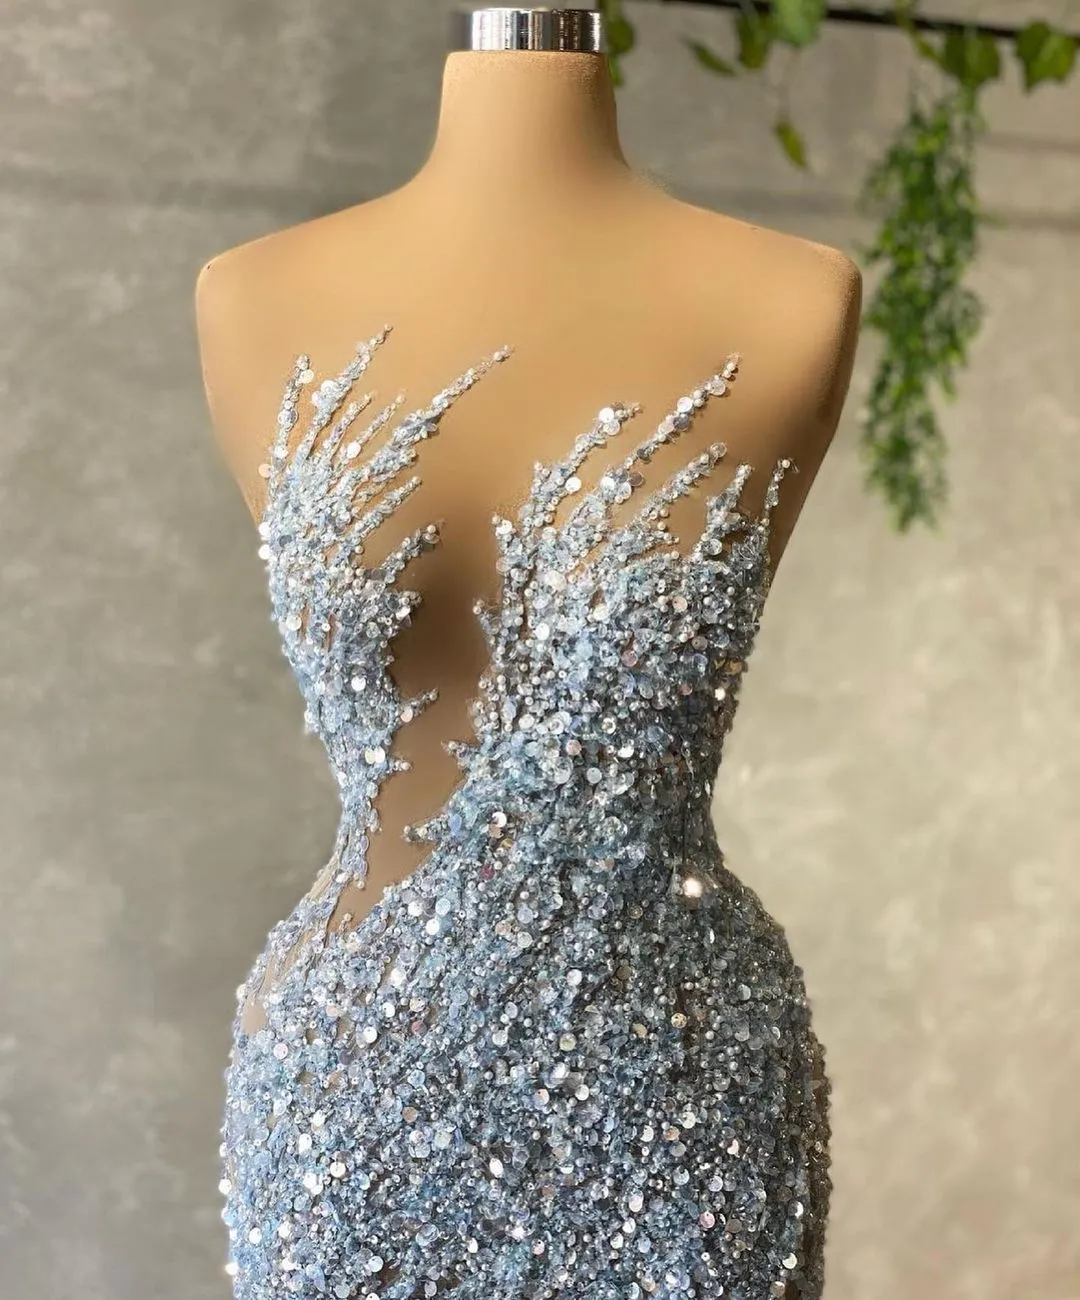 New Arrival Mermaid Prom Dresses Sleeveless V Neck Appliques Sequins Beaded Lace Hollow Beaded Floor Length Diamonds Evening Formal Dresses Plus Size Custom Made